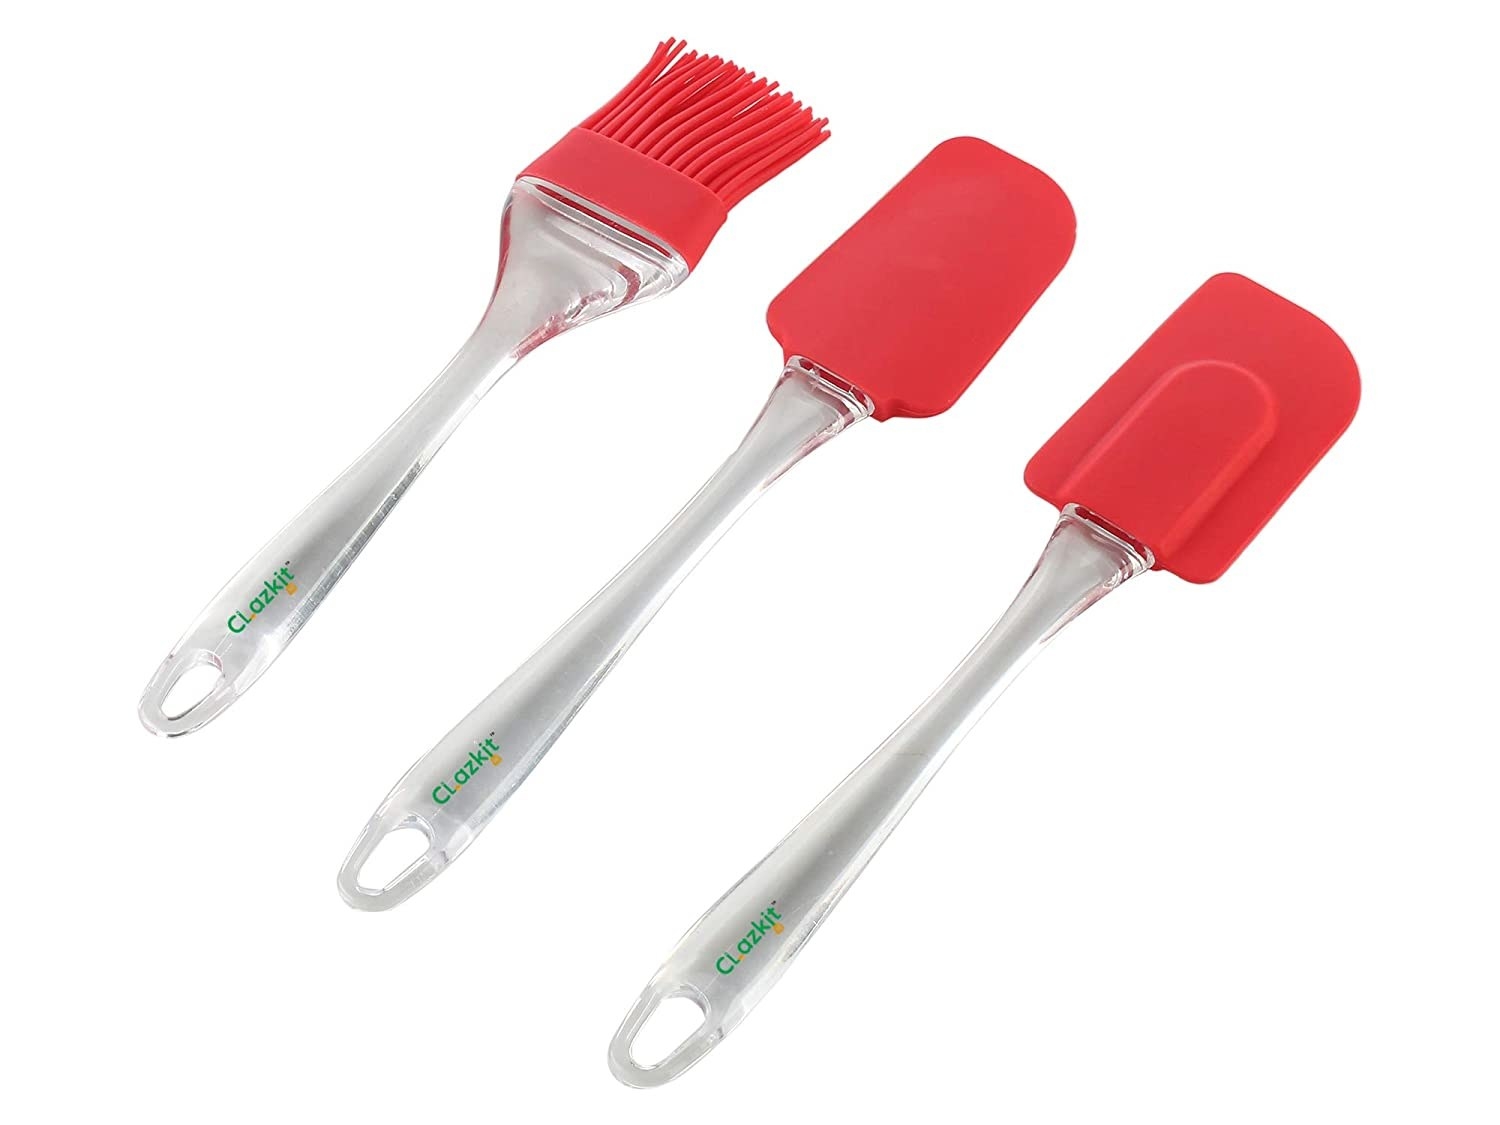 2 red silicone spatulas and 1 red silicone brush